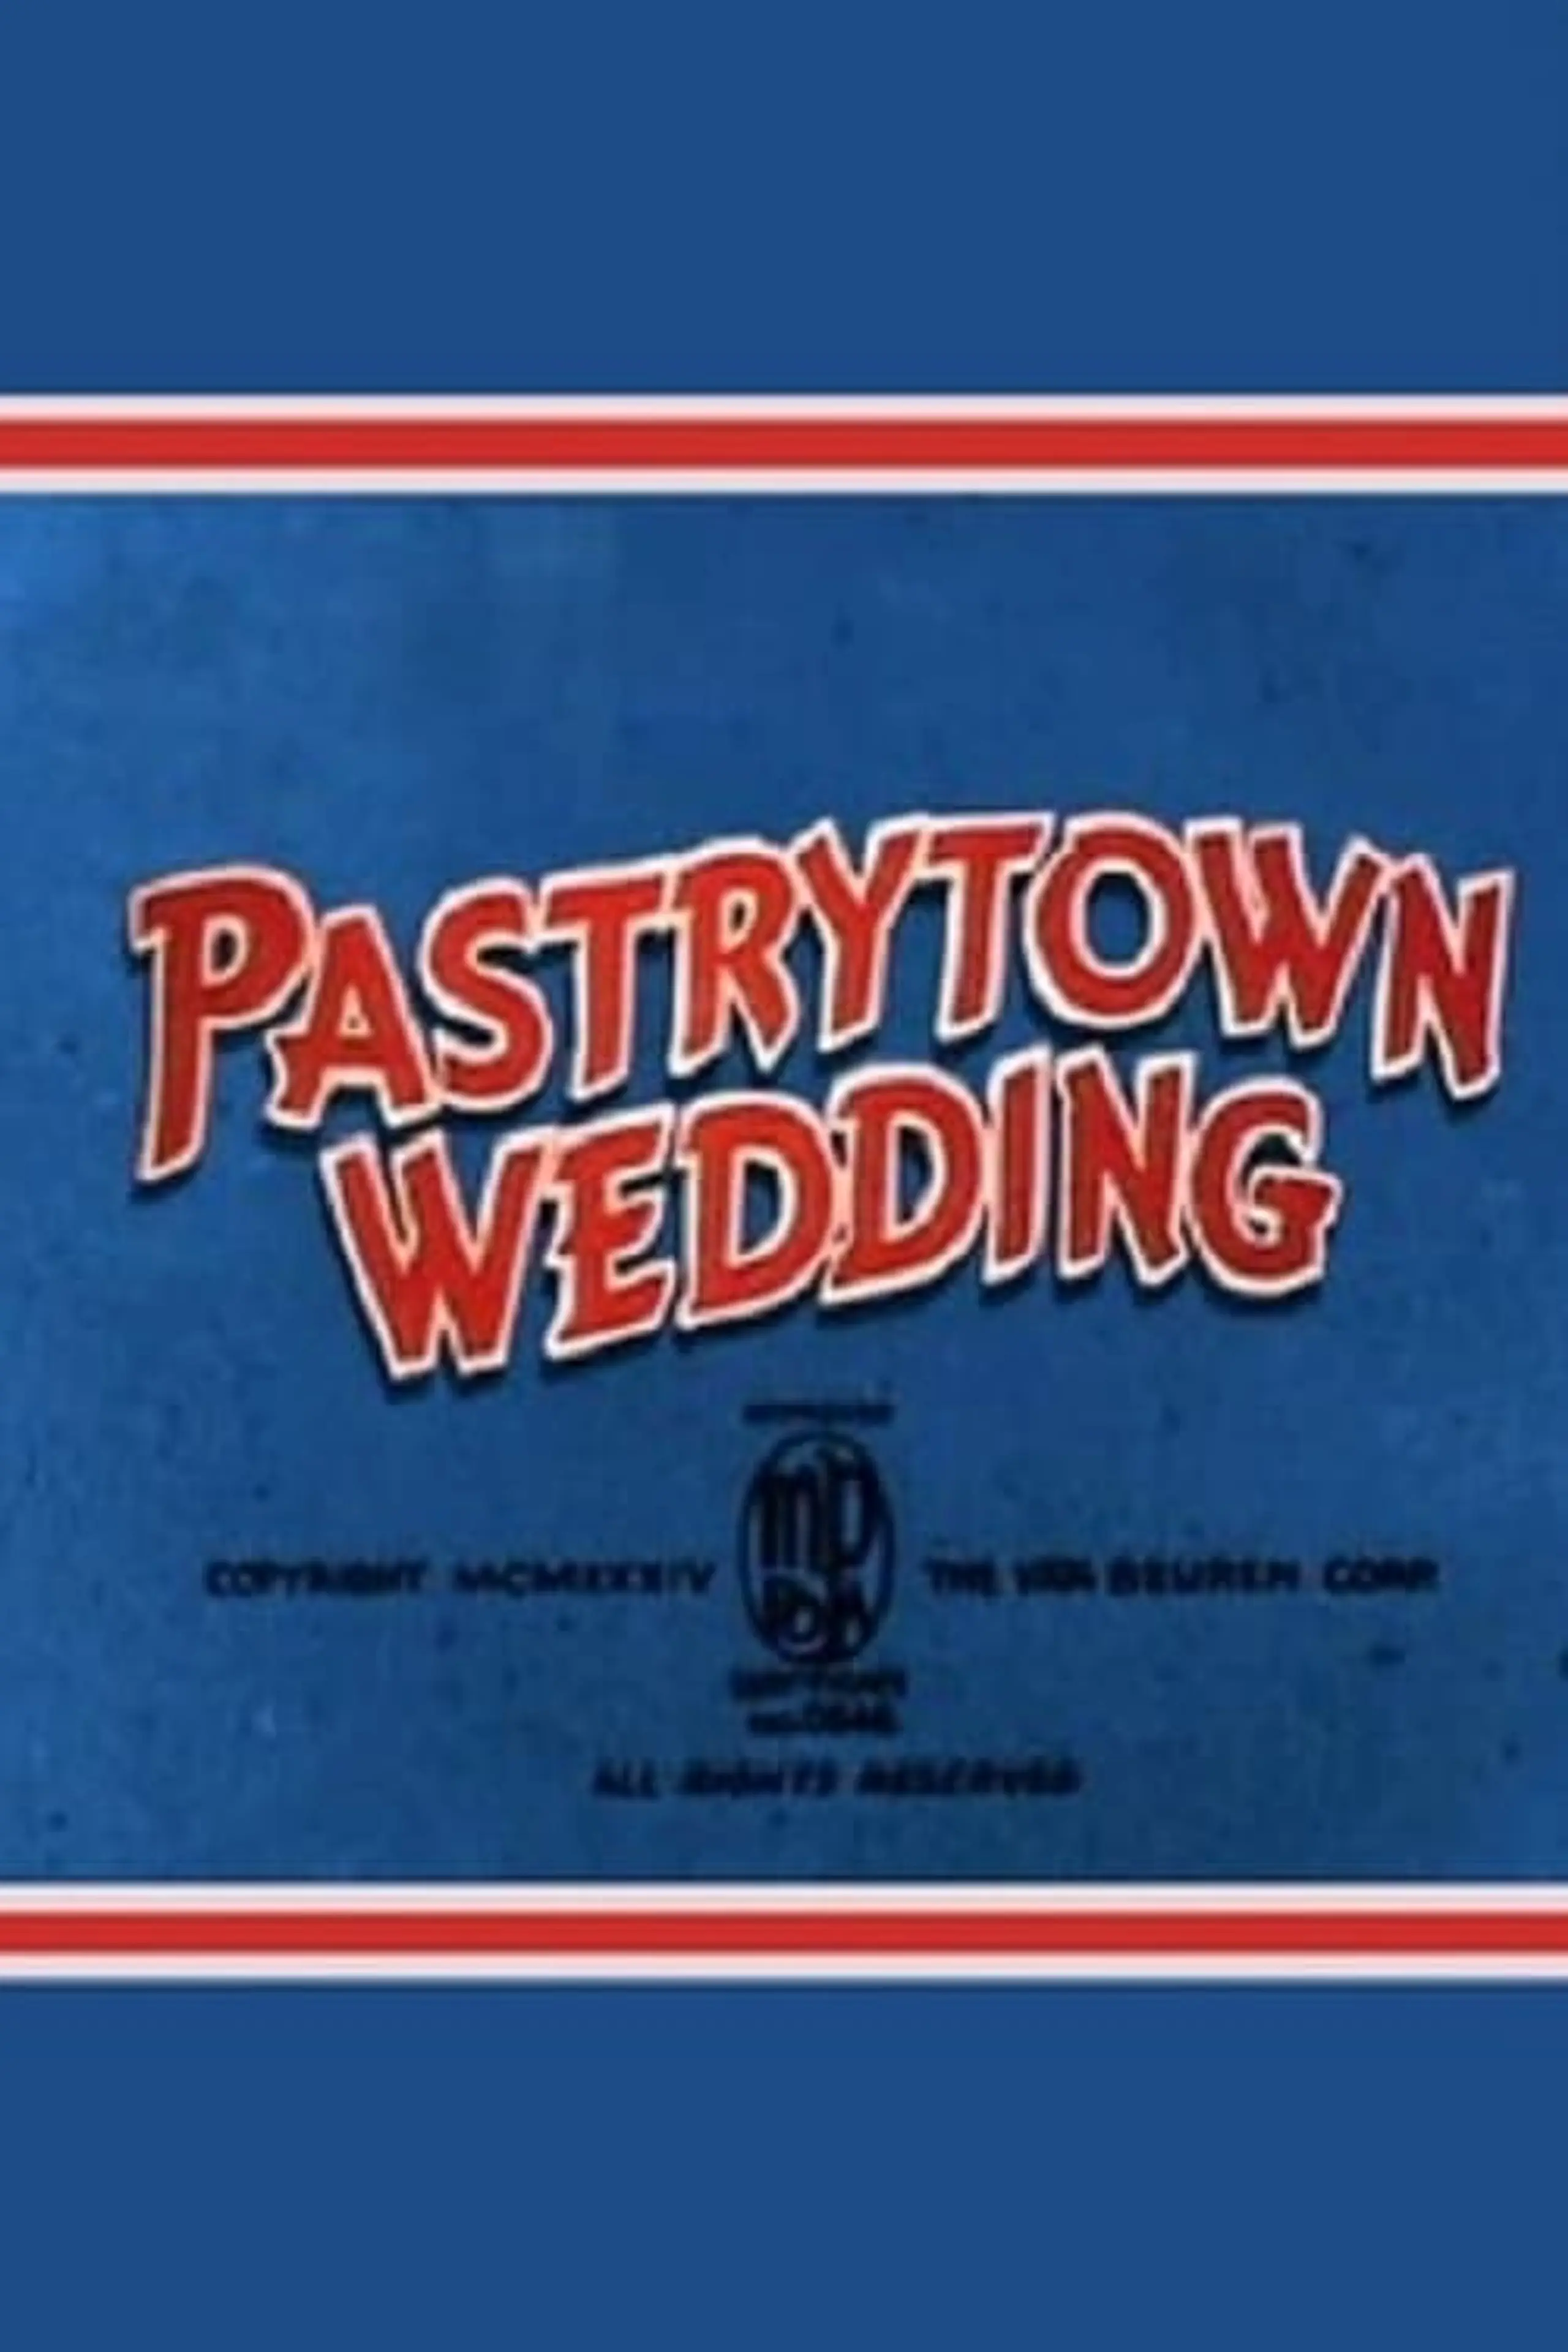 Pastry Town Wedding